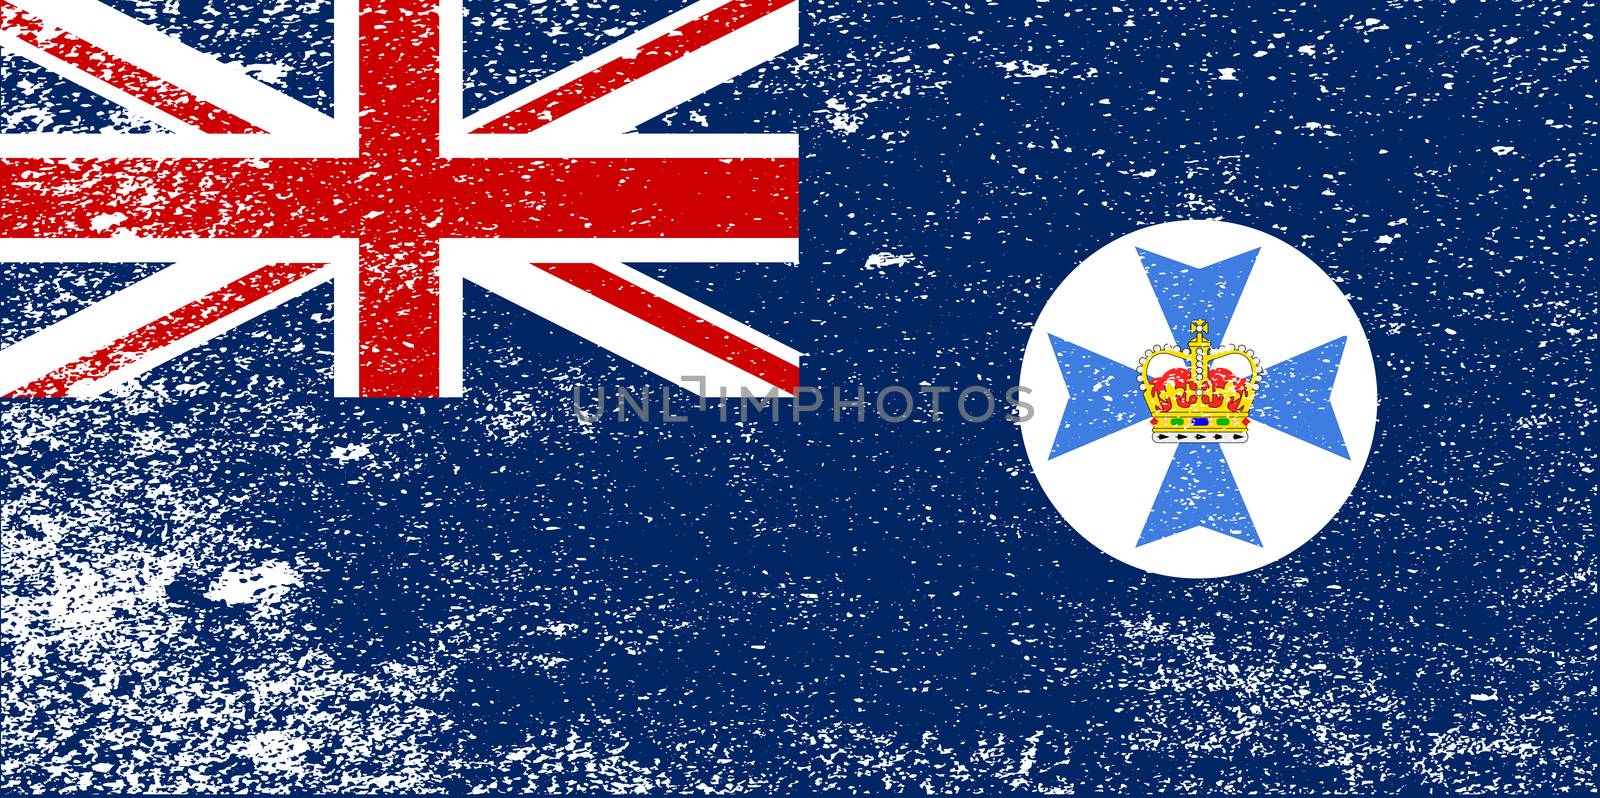 The flag of the Australian state of Queensland with grunge